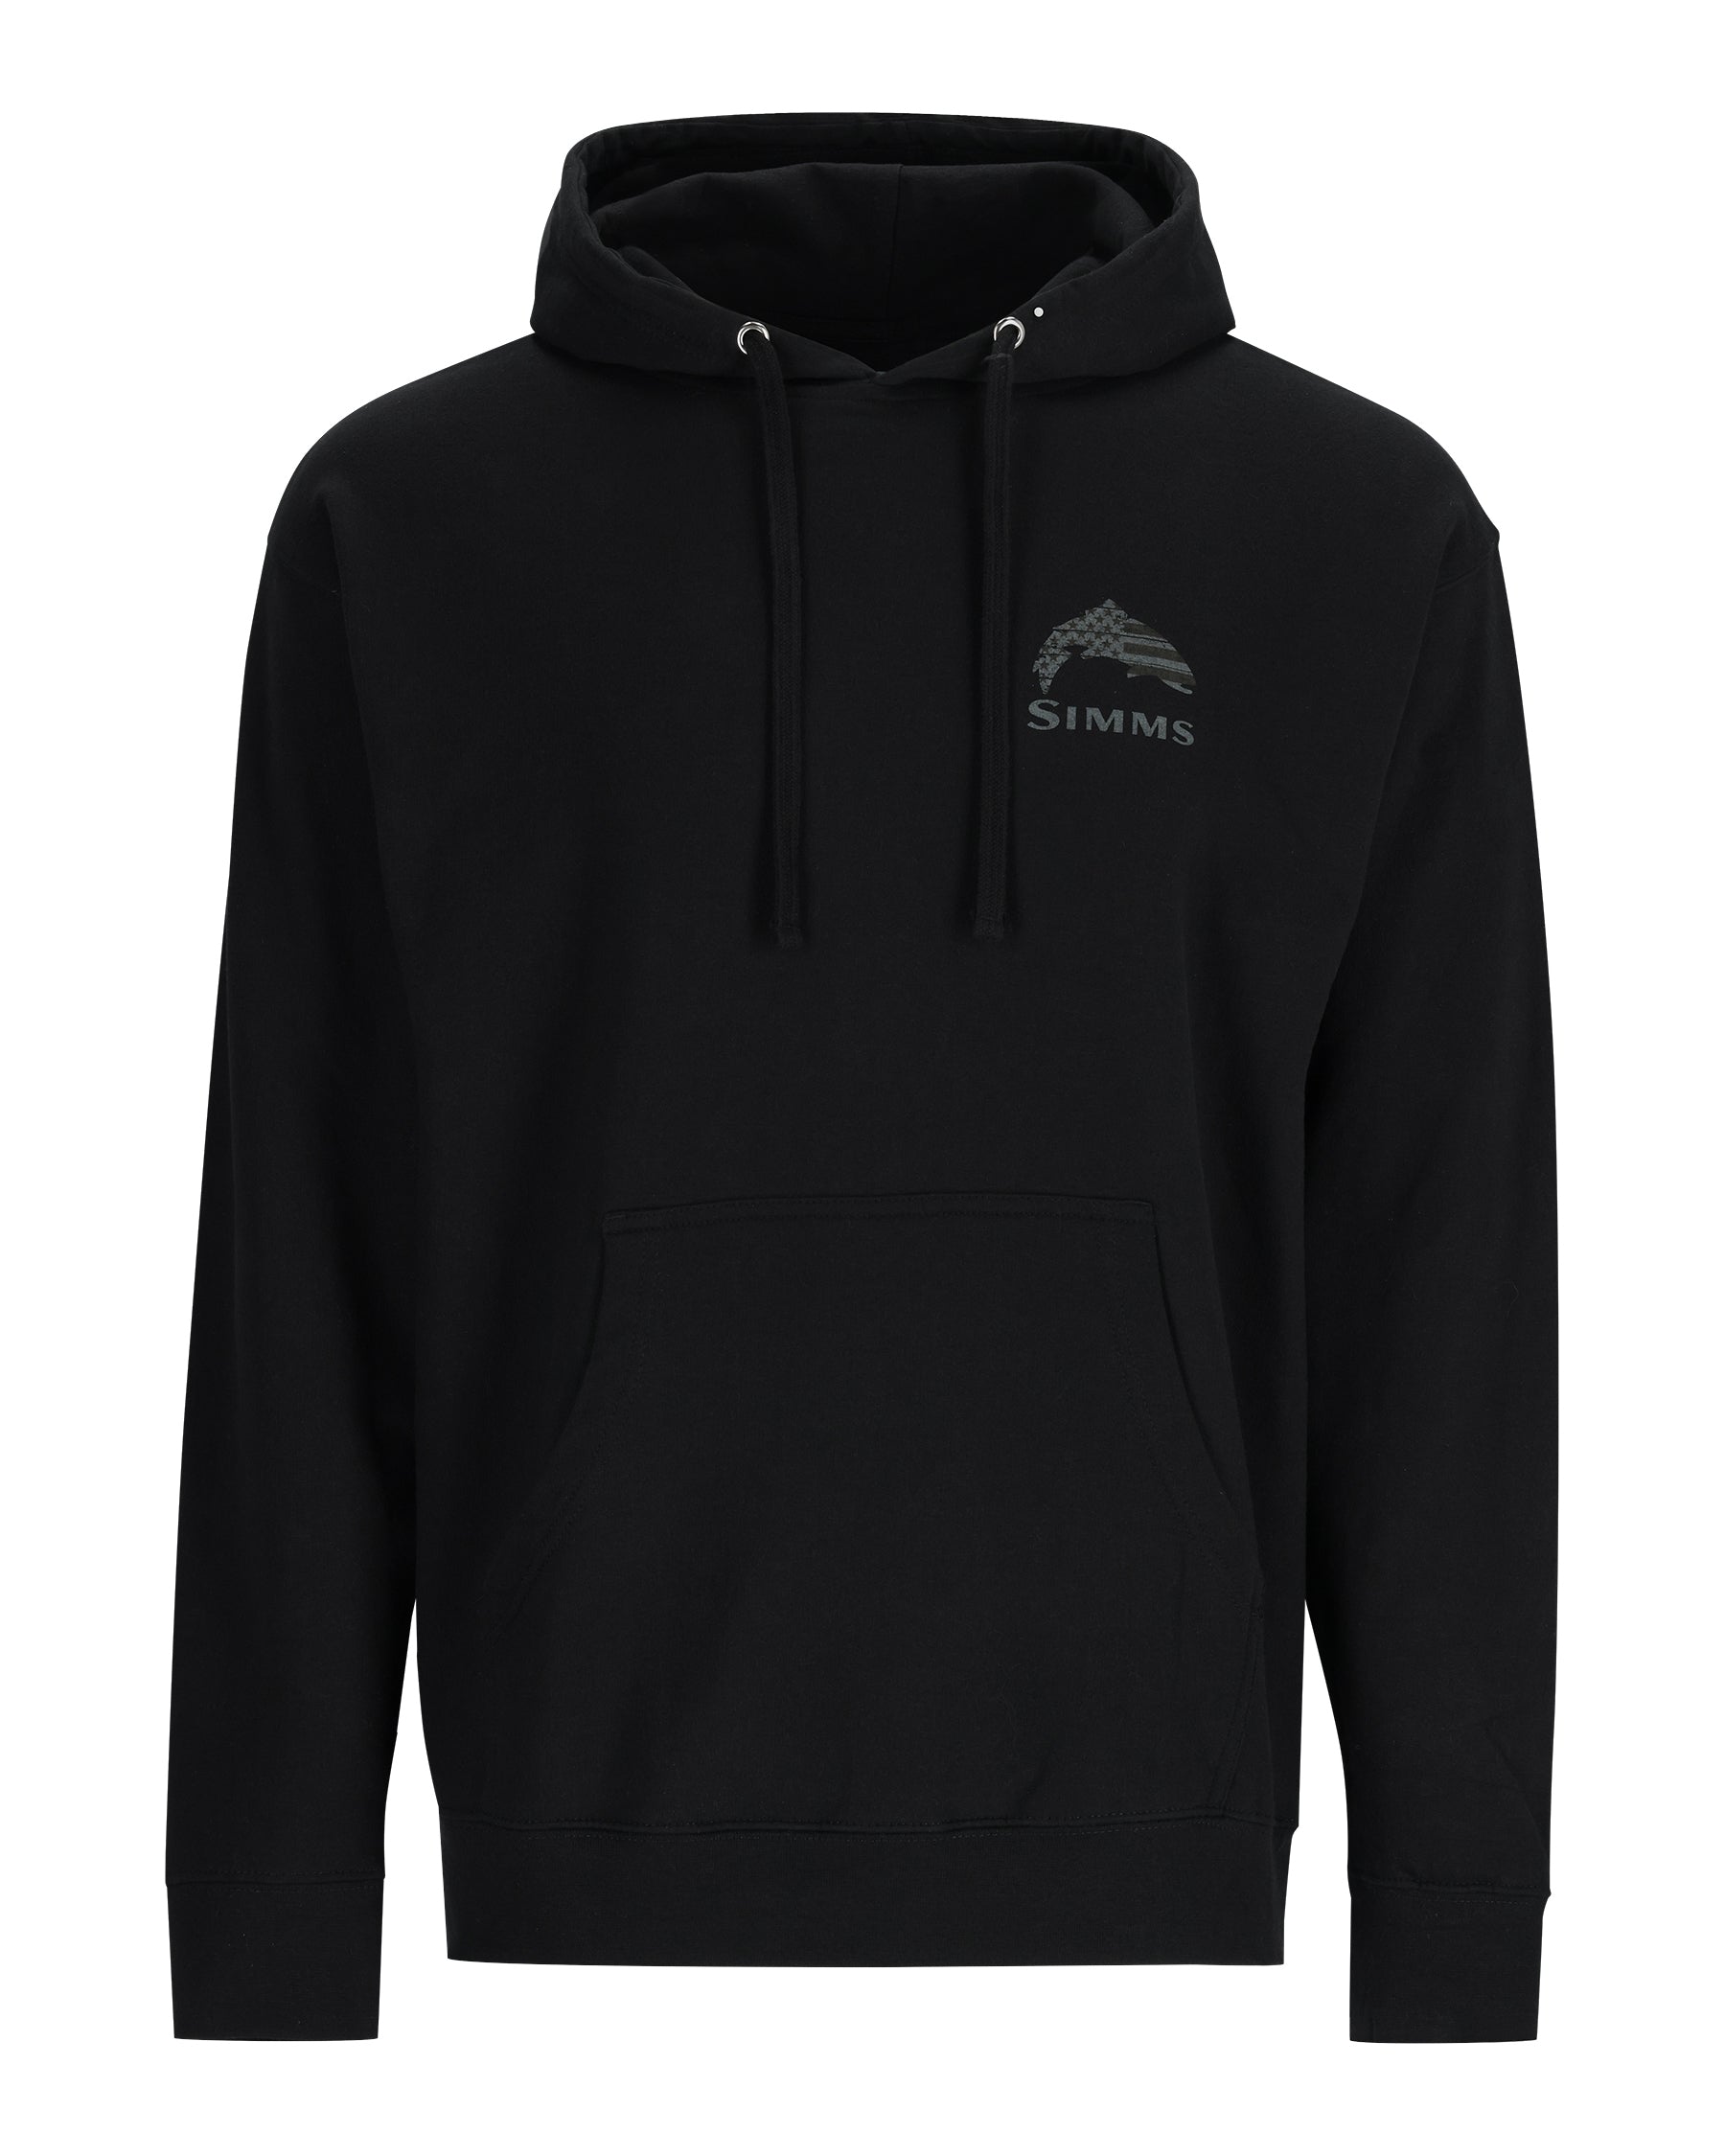 M's Wooden Flag Trout Hoody | Simms Fishing Products